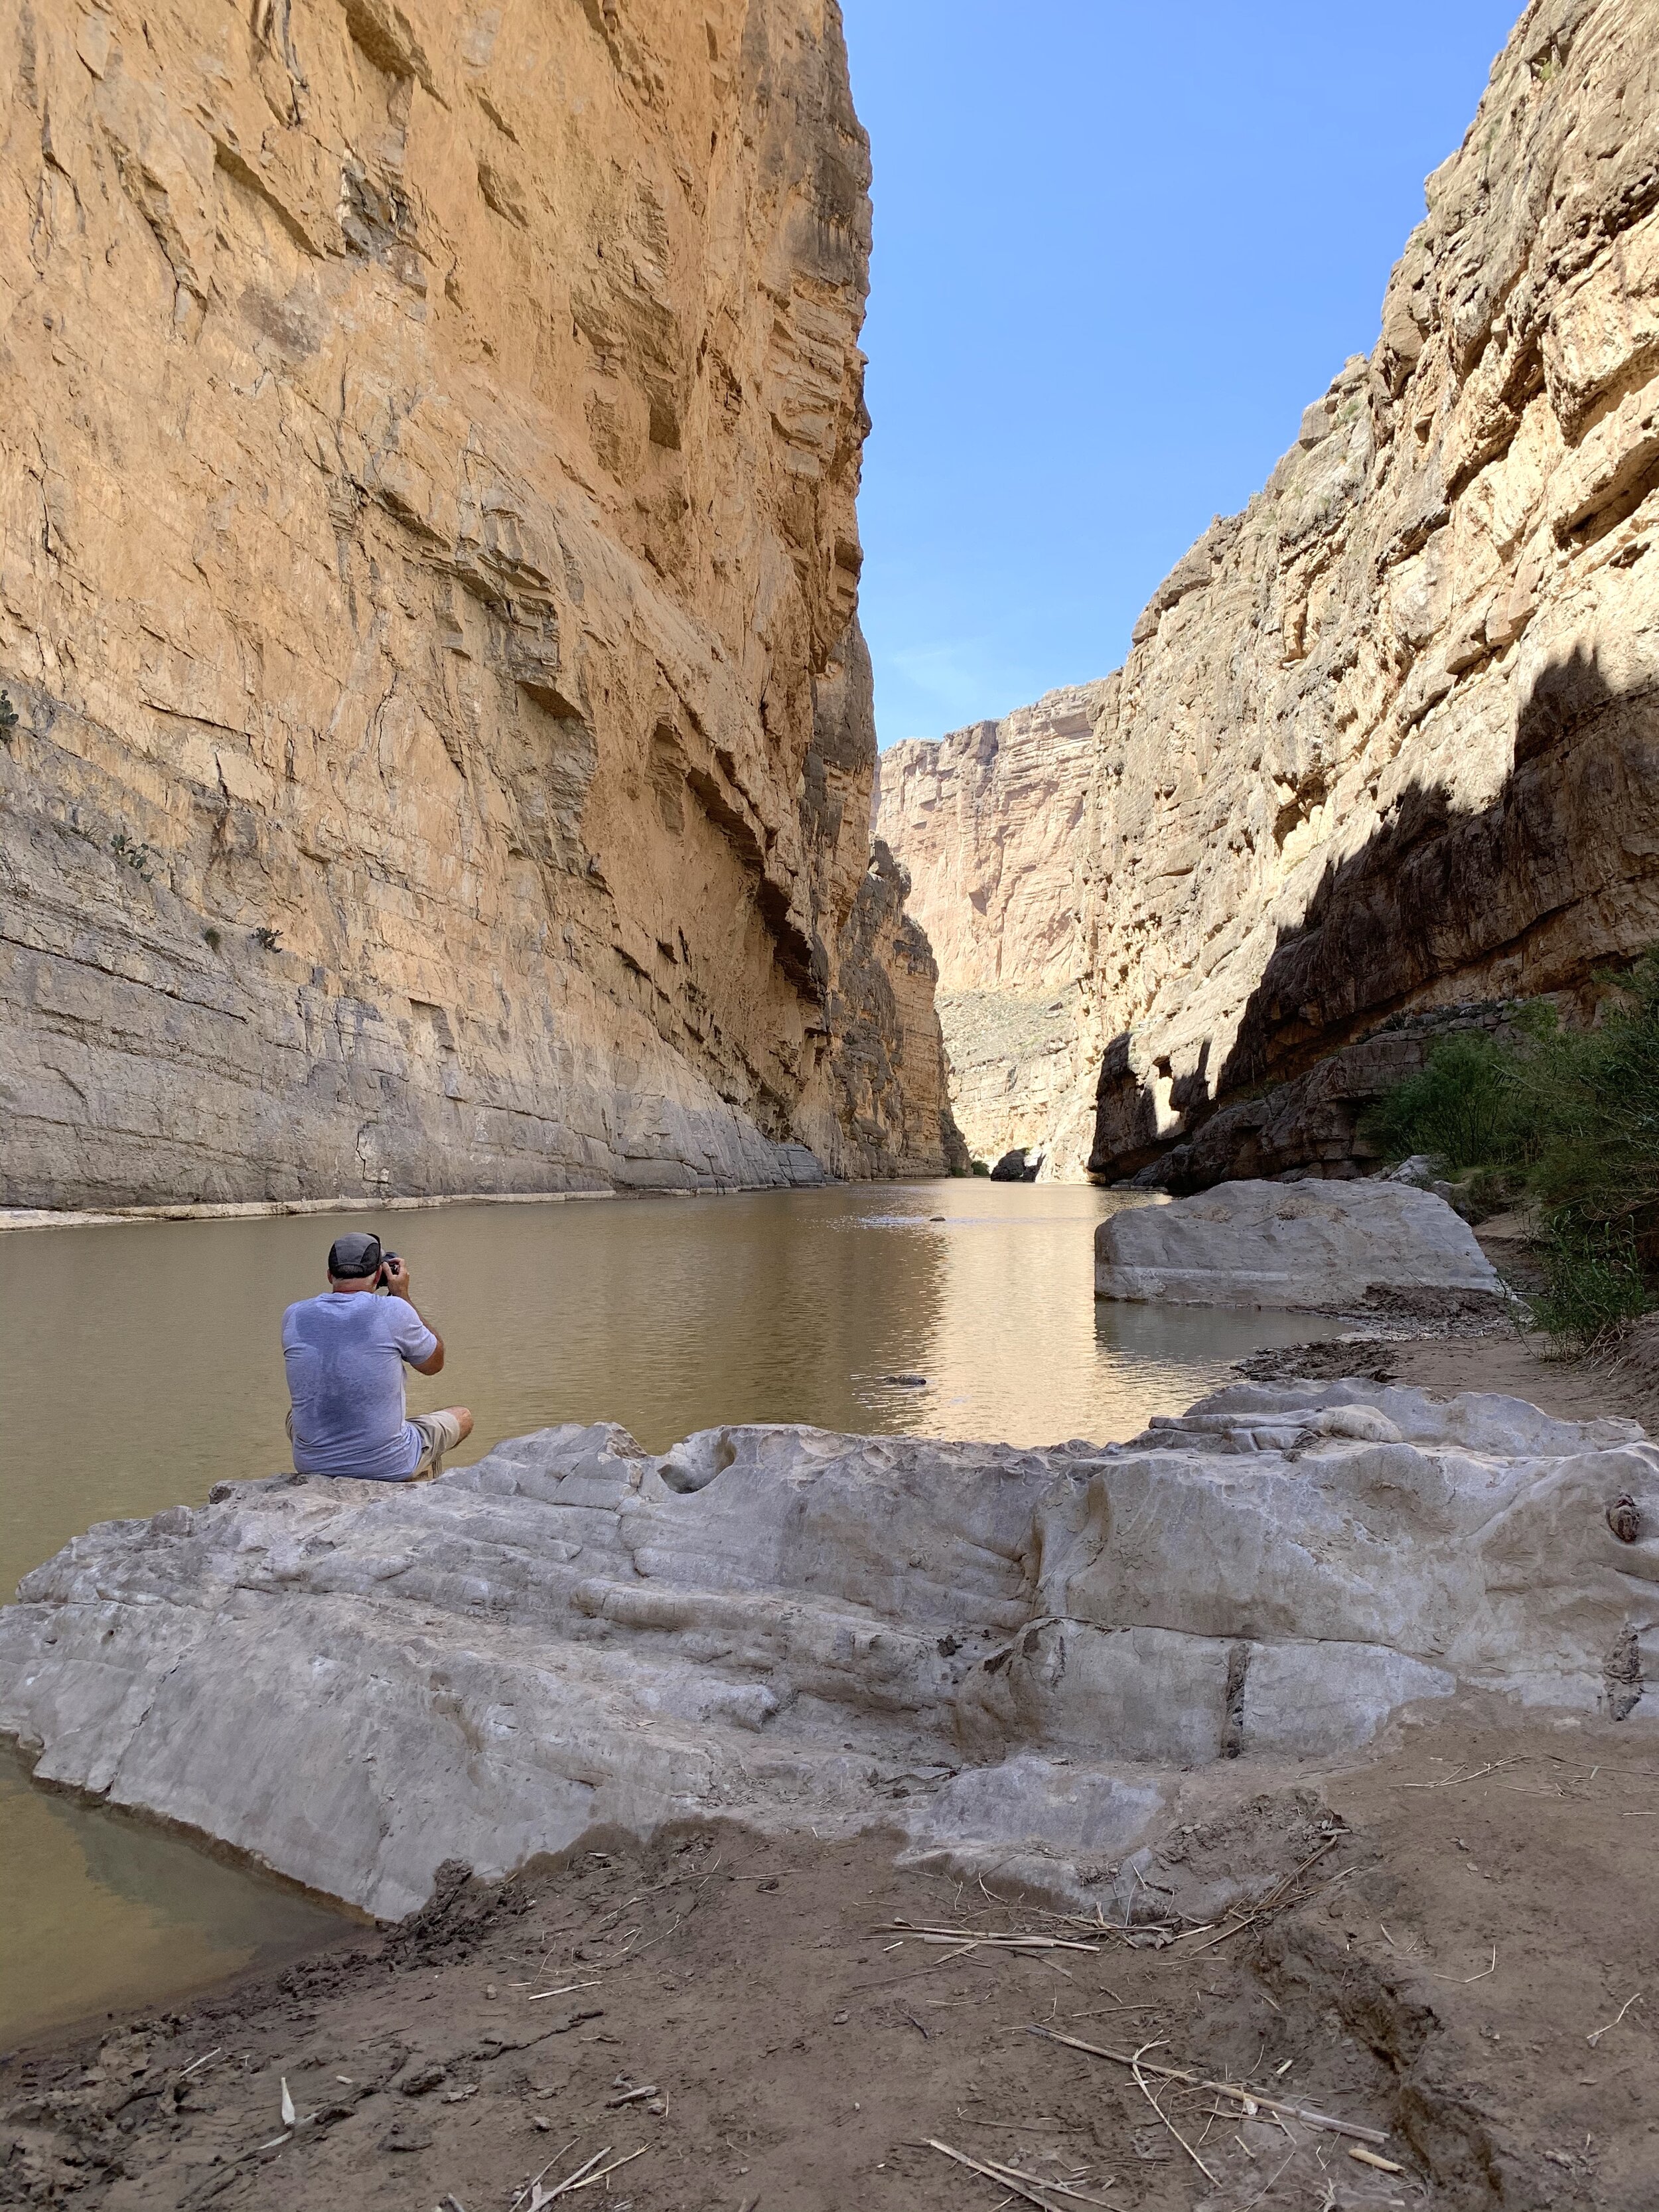  Santa Elena Canyon in Big Bend National Park. In this photo, Mexico is on the left side of the canyon and the canyon on the right is the United States. The Rio Grande that runs in between is the international boundary line.  